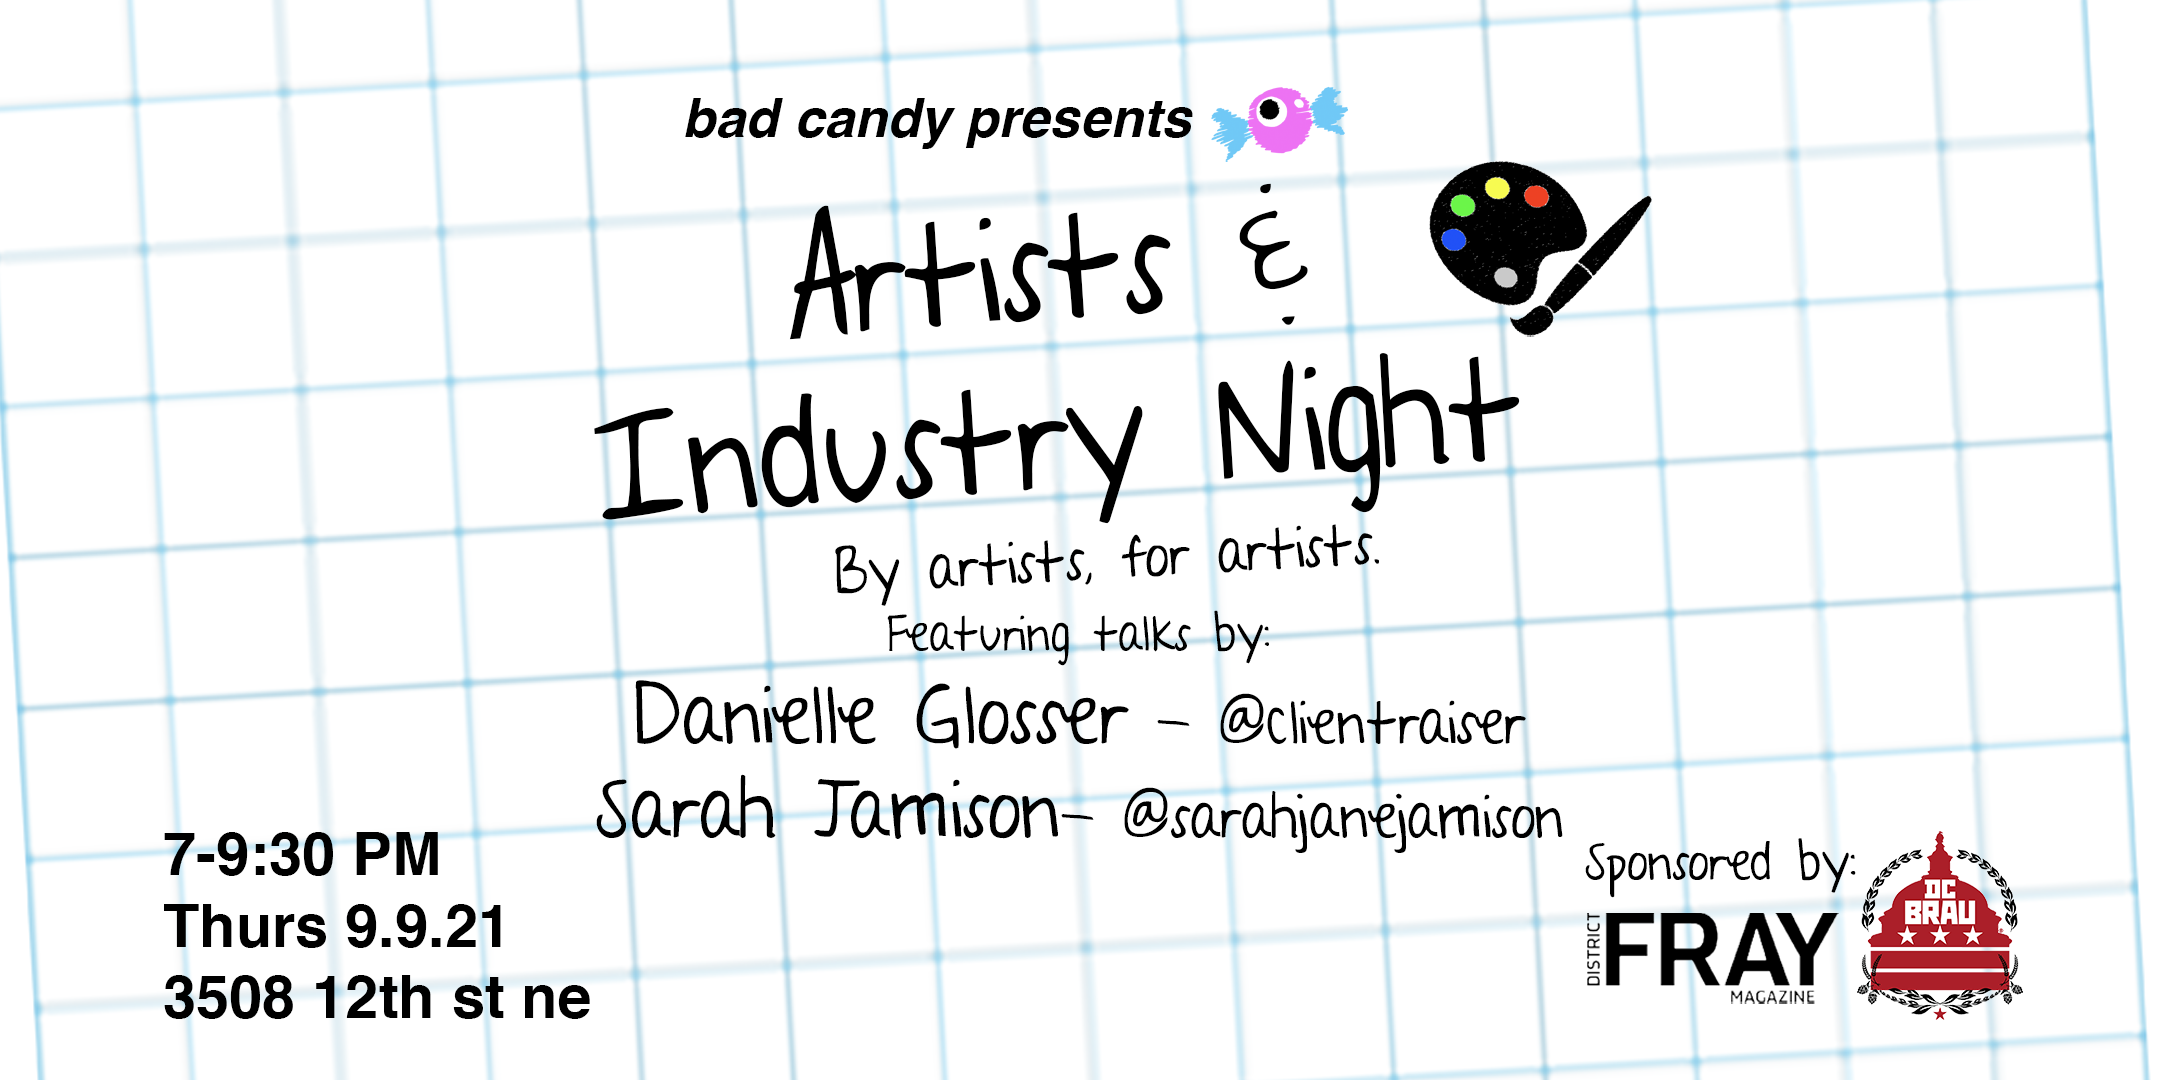 Artists & Industry Night at Bad Candy